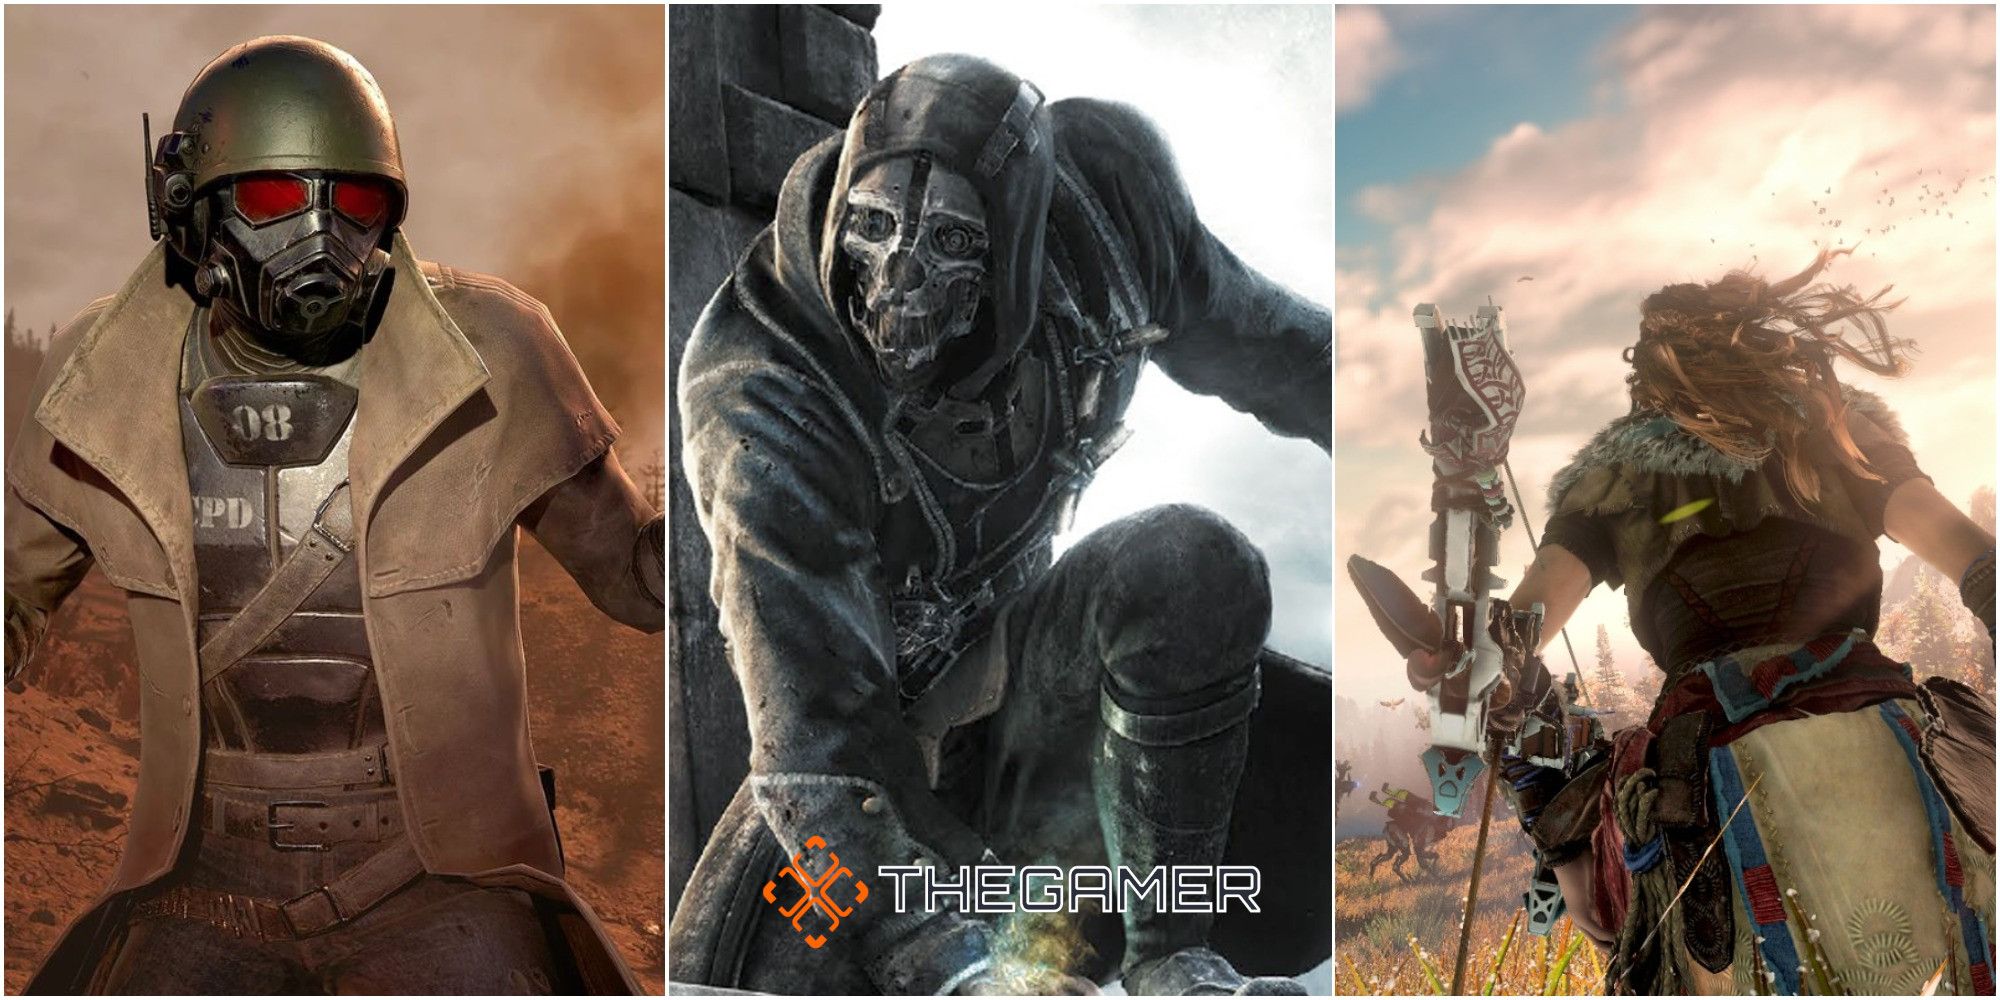 characters from Fallout New Vegas Horizon Zero Dawn and Dishonored in a 3 way vertical split image